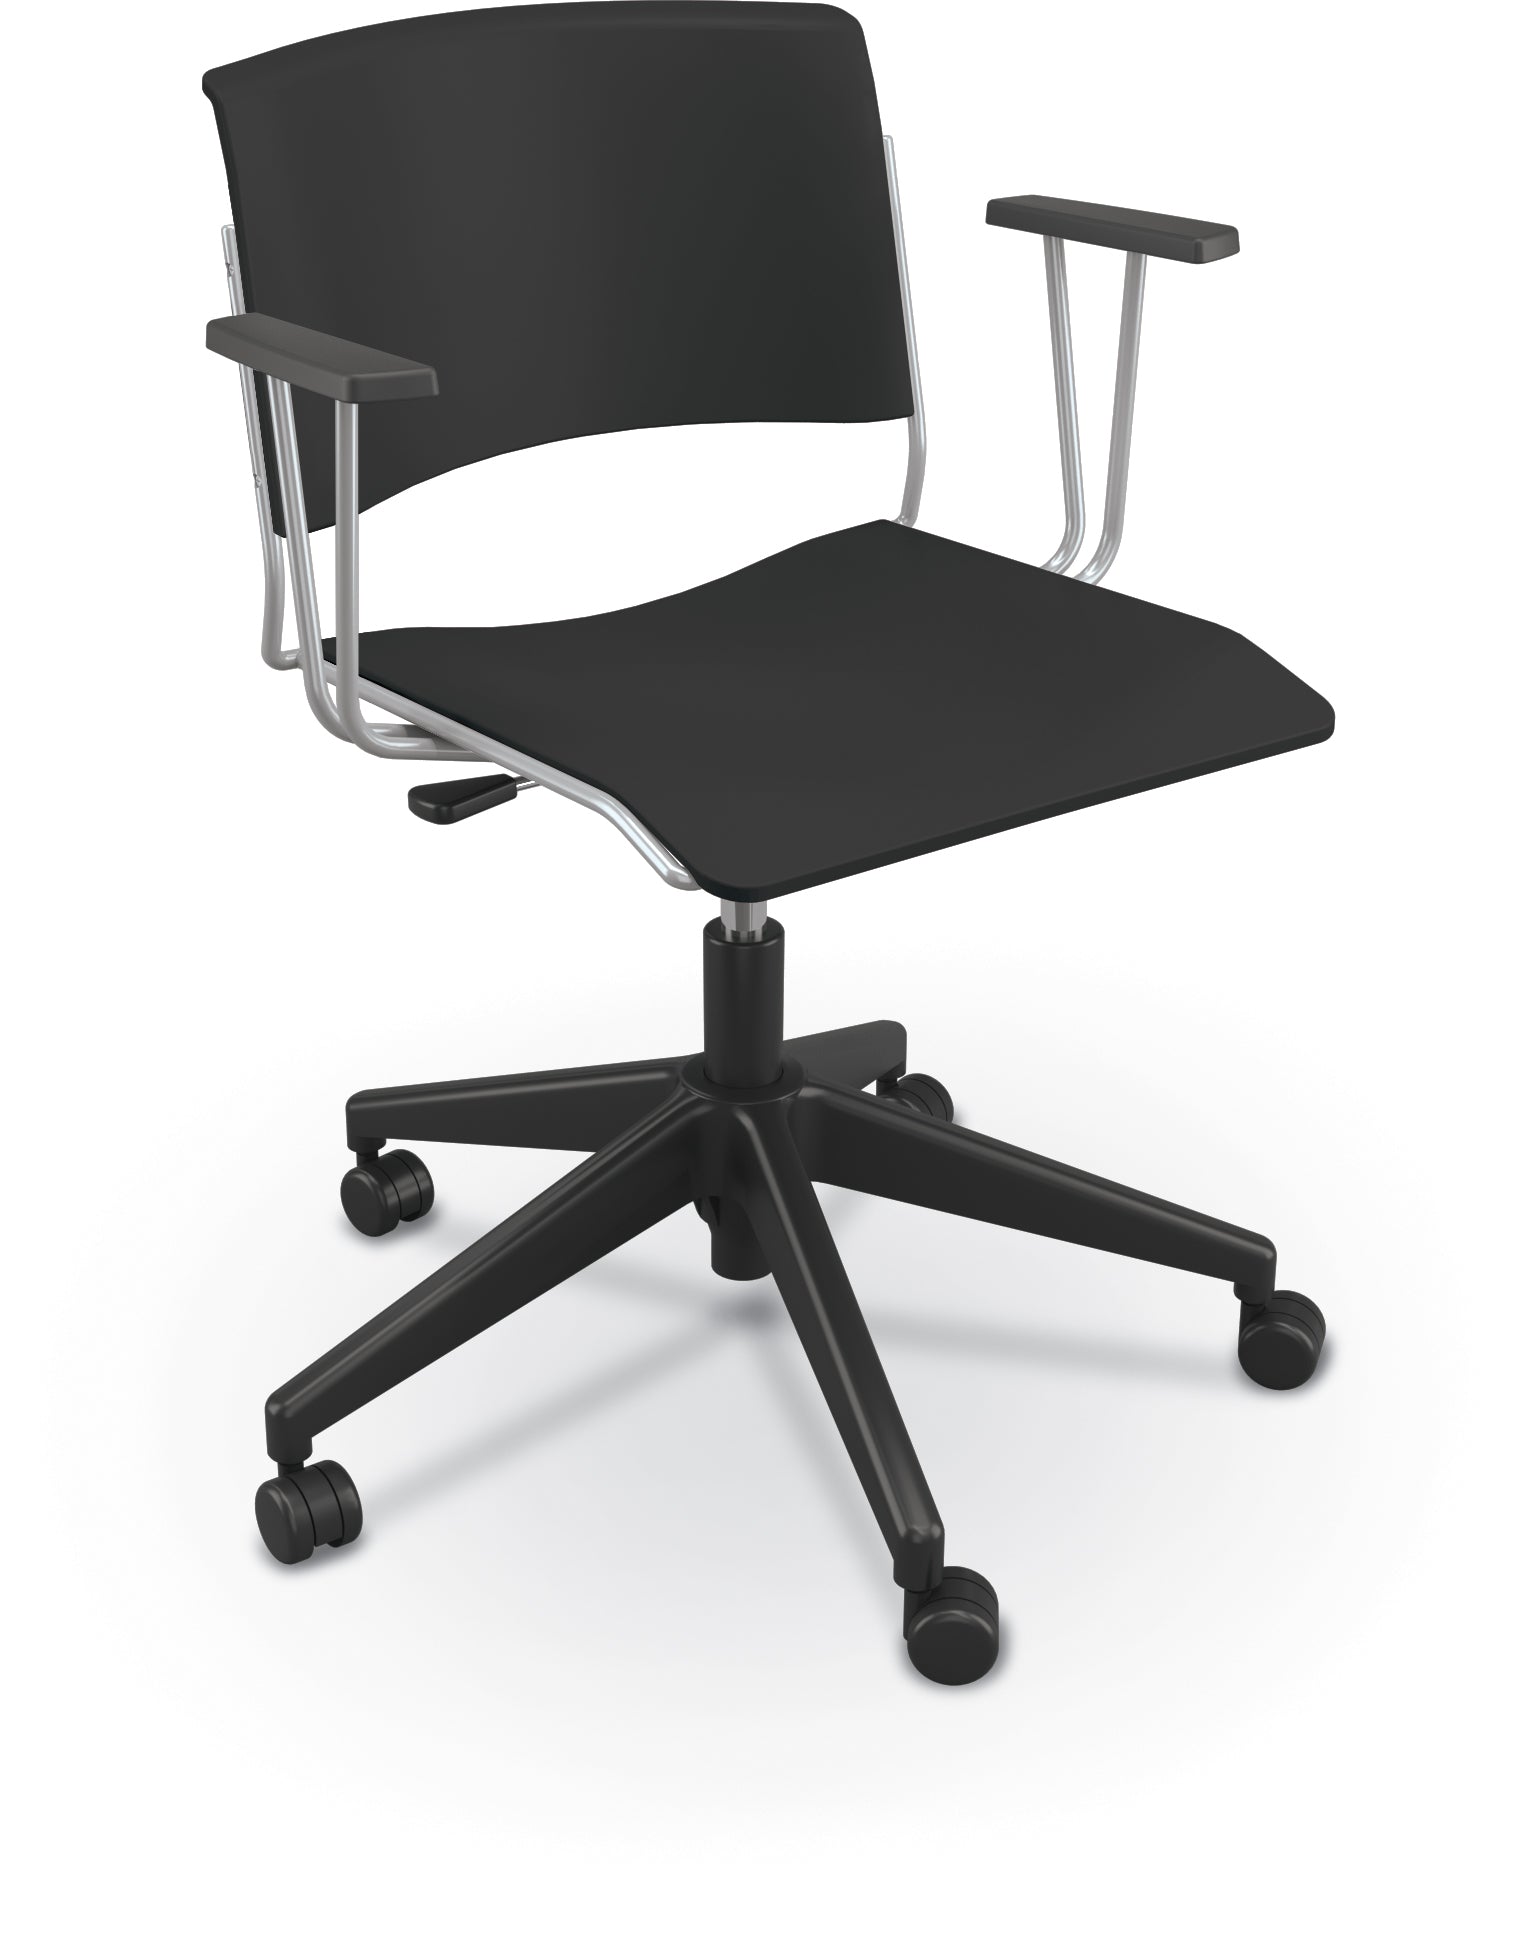 Mooreco Akt Optional Arms for 5-Star Base Chair/Stool - SchoolOutlet